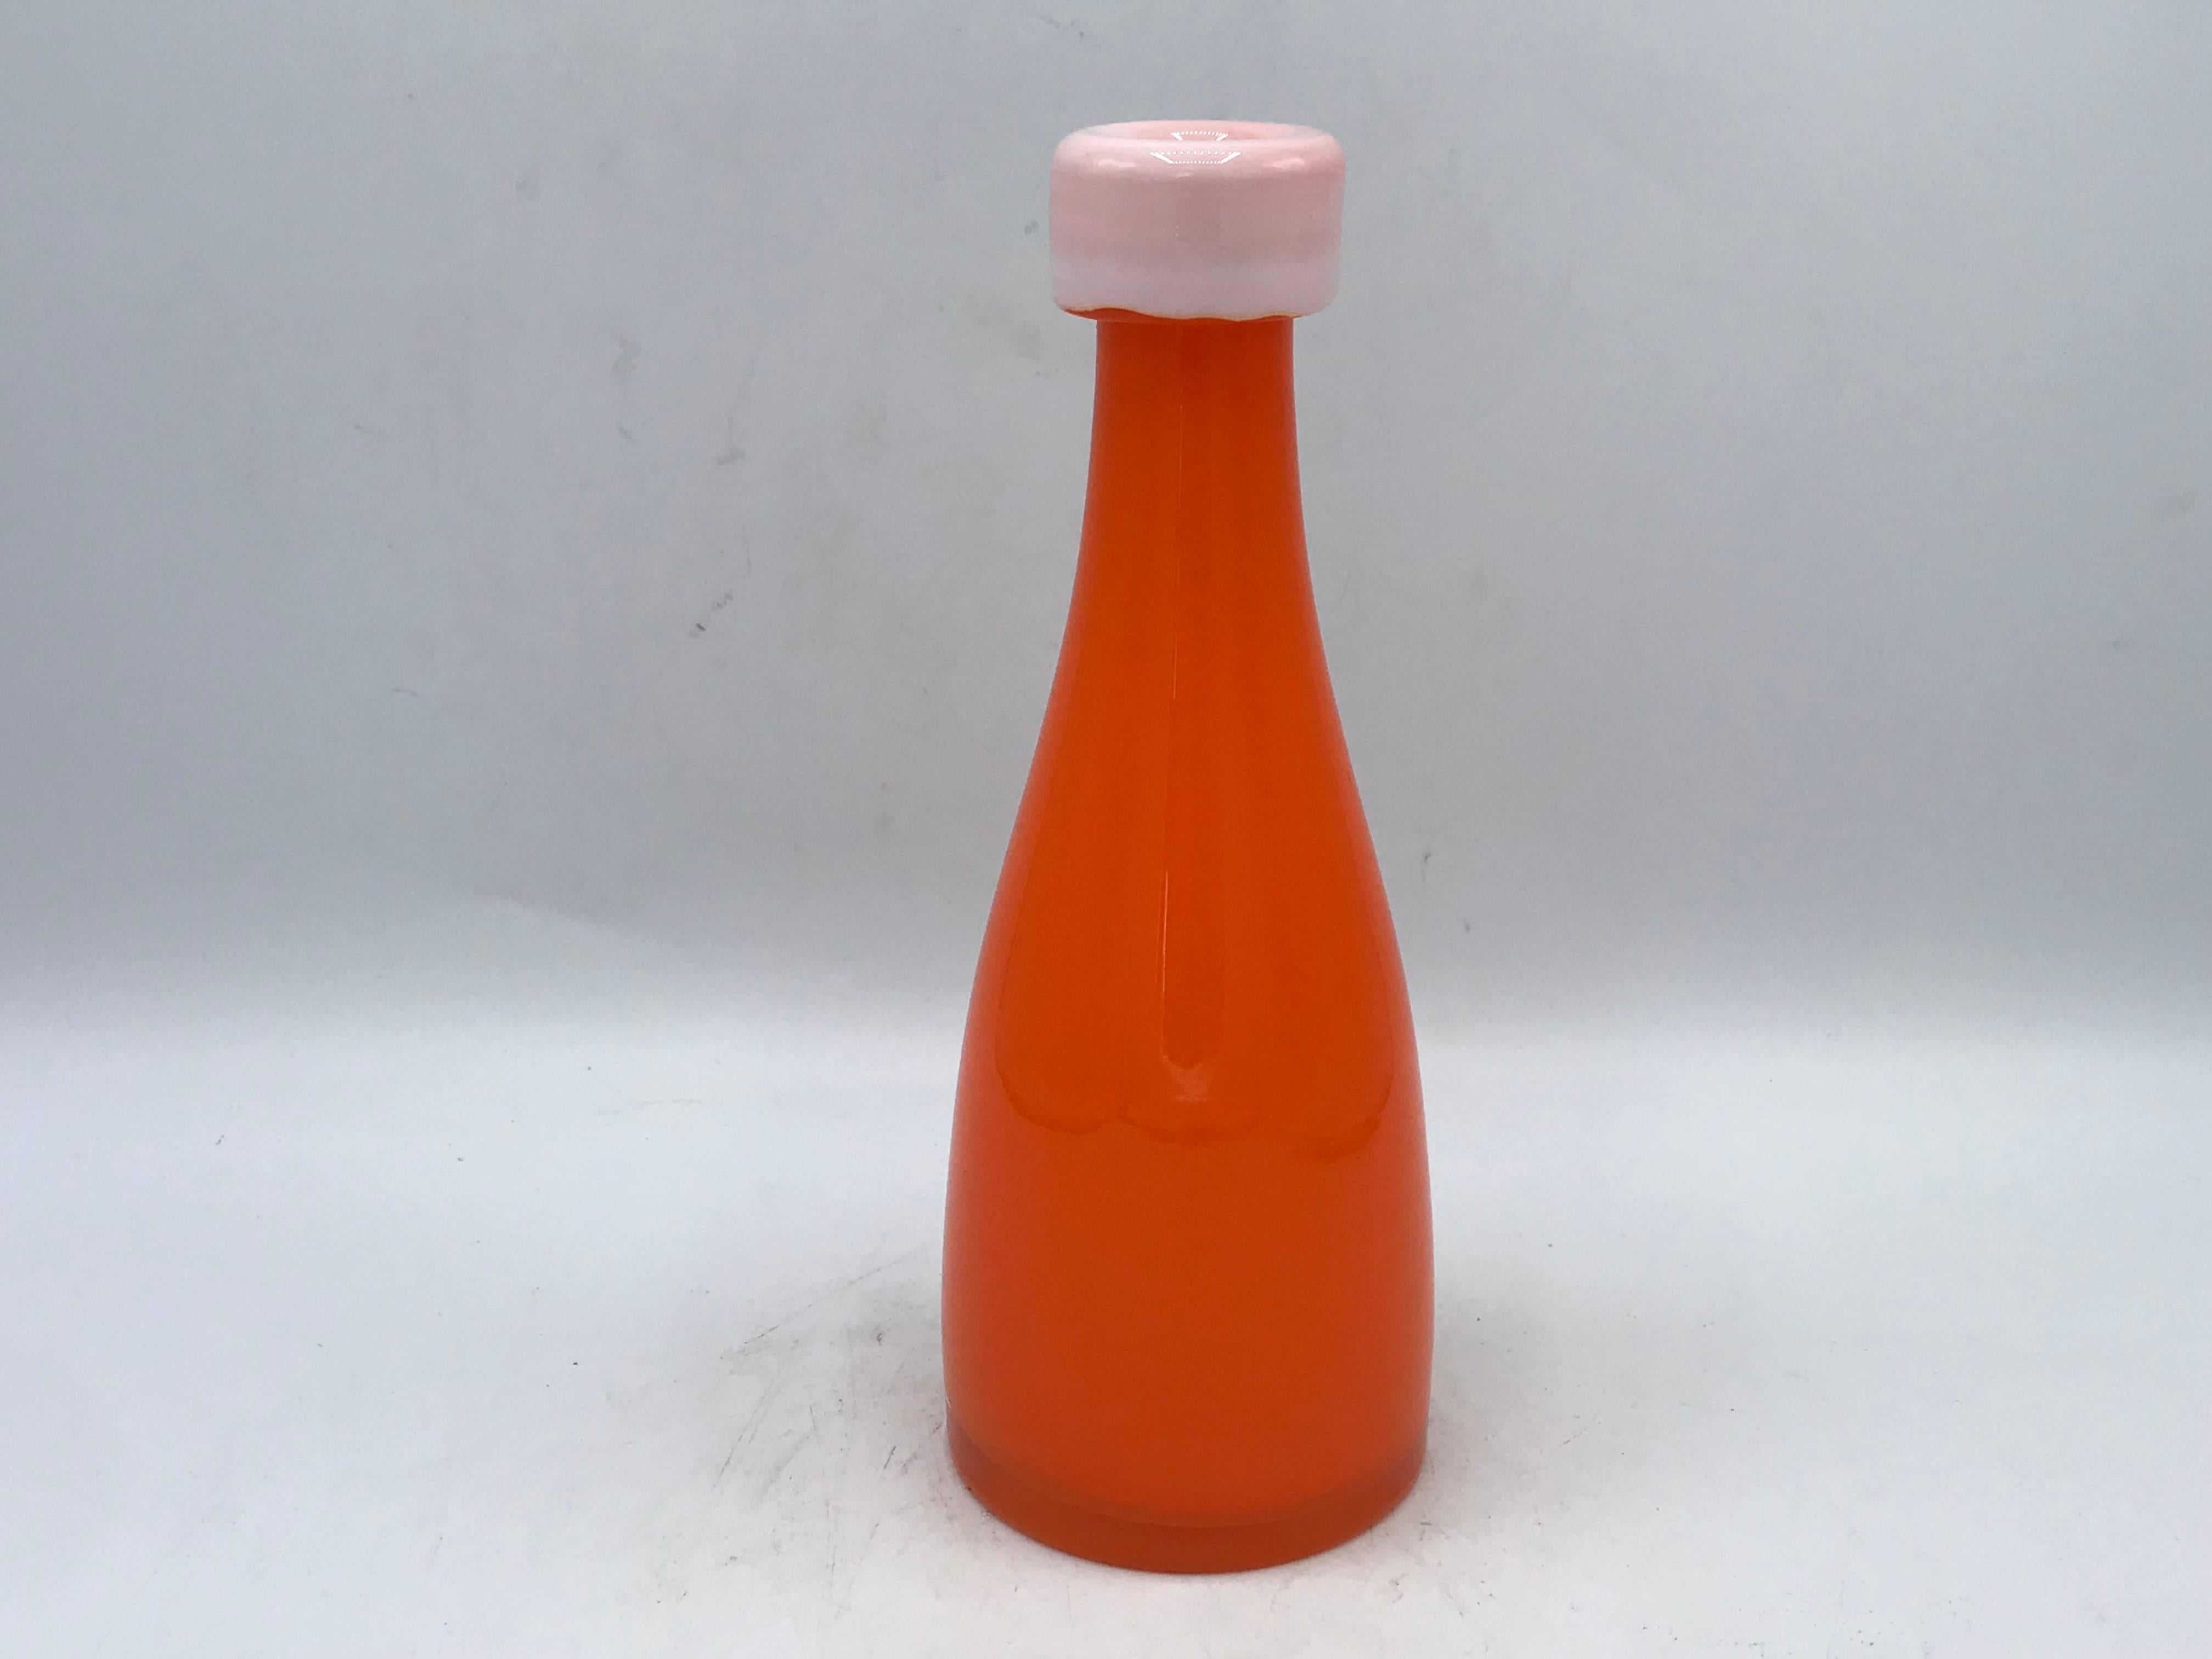 Listed is a fabulous and rare, 1970s Italian Murano glass orange bottle vase. This classic shape has a modern twist and pop of color with the sunburst orange, lightened with the white opening.